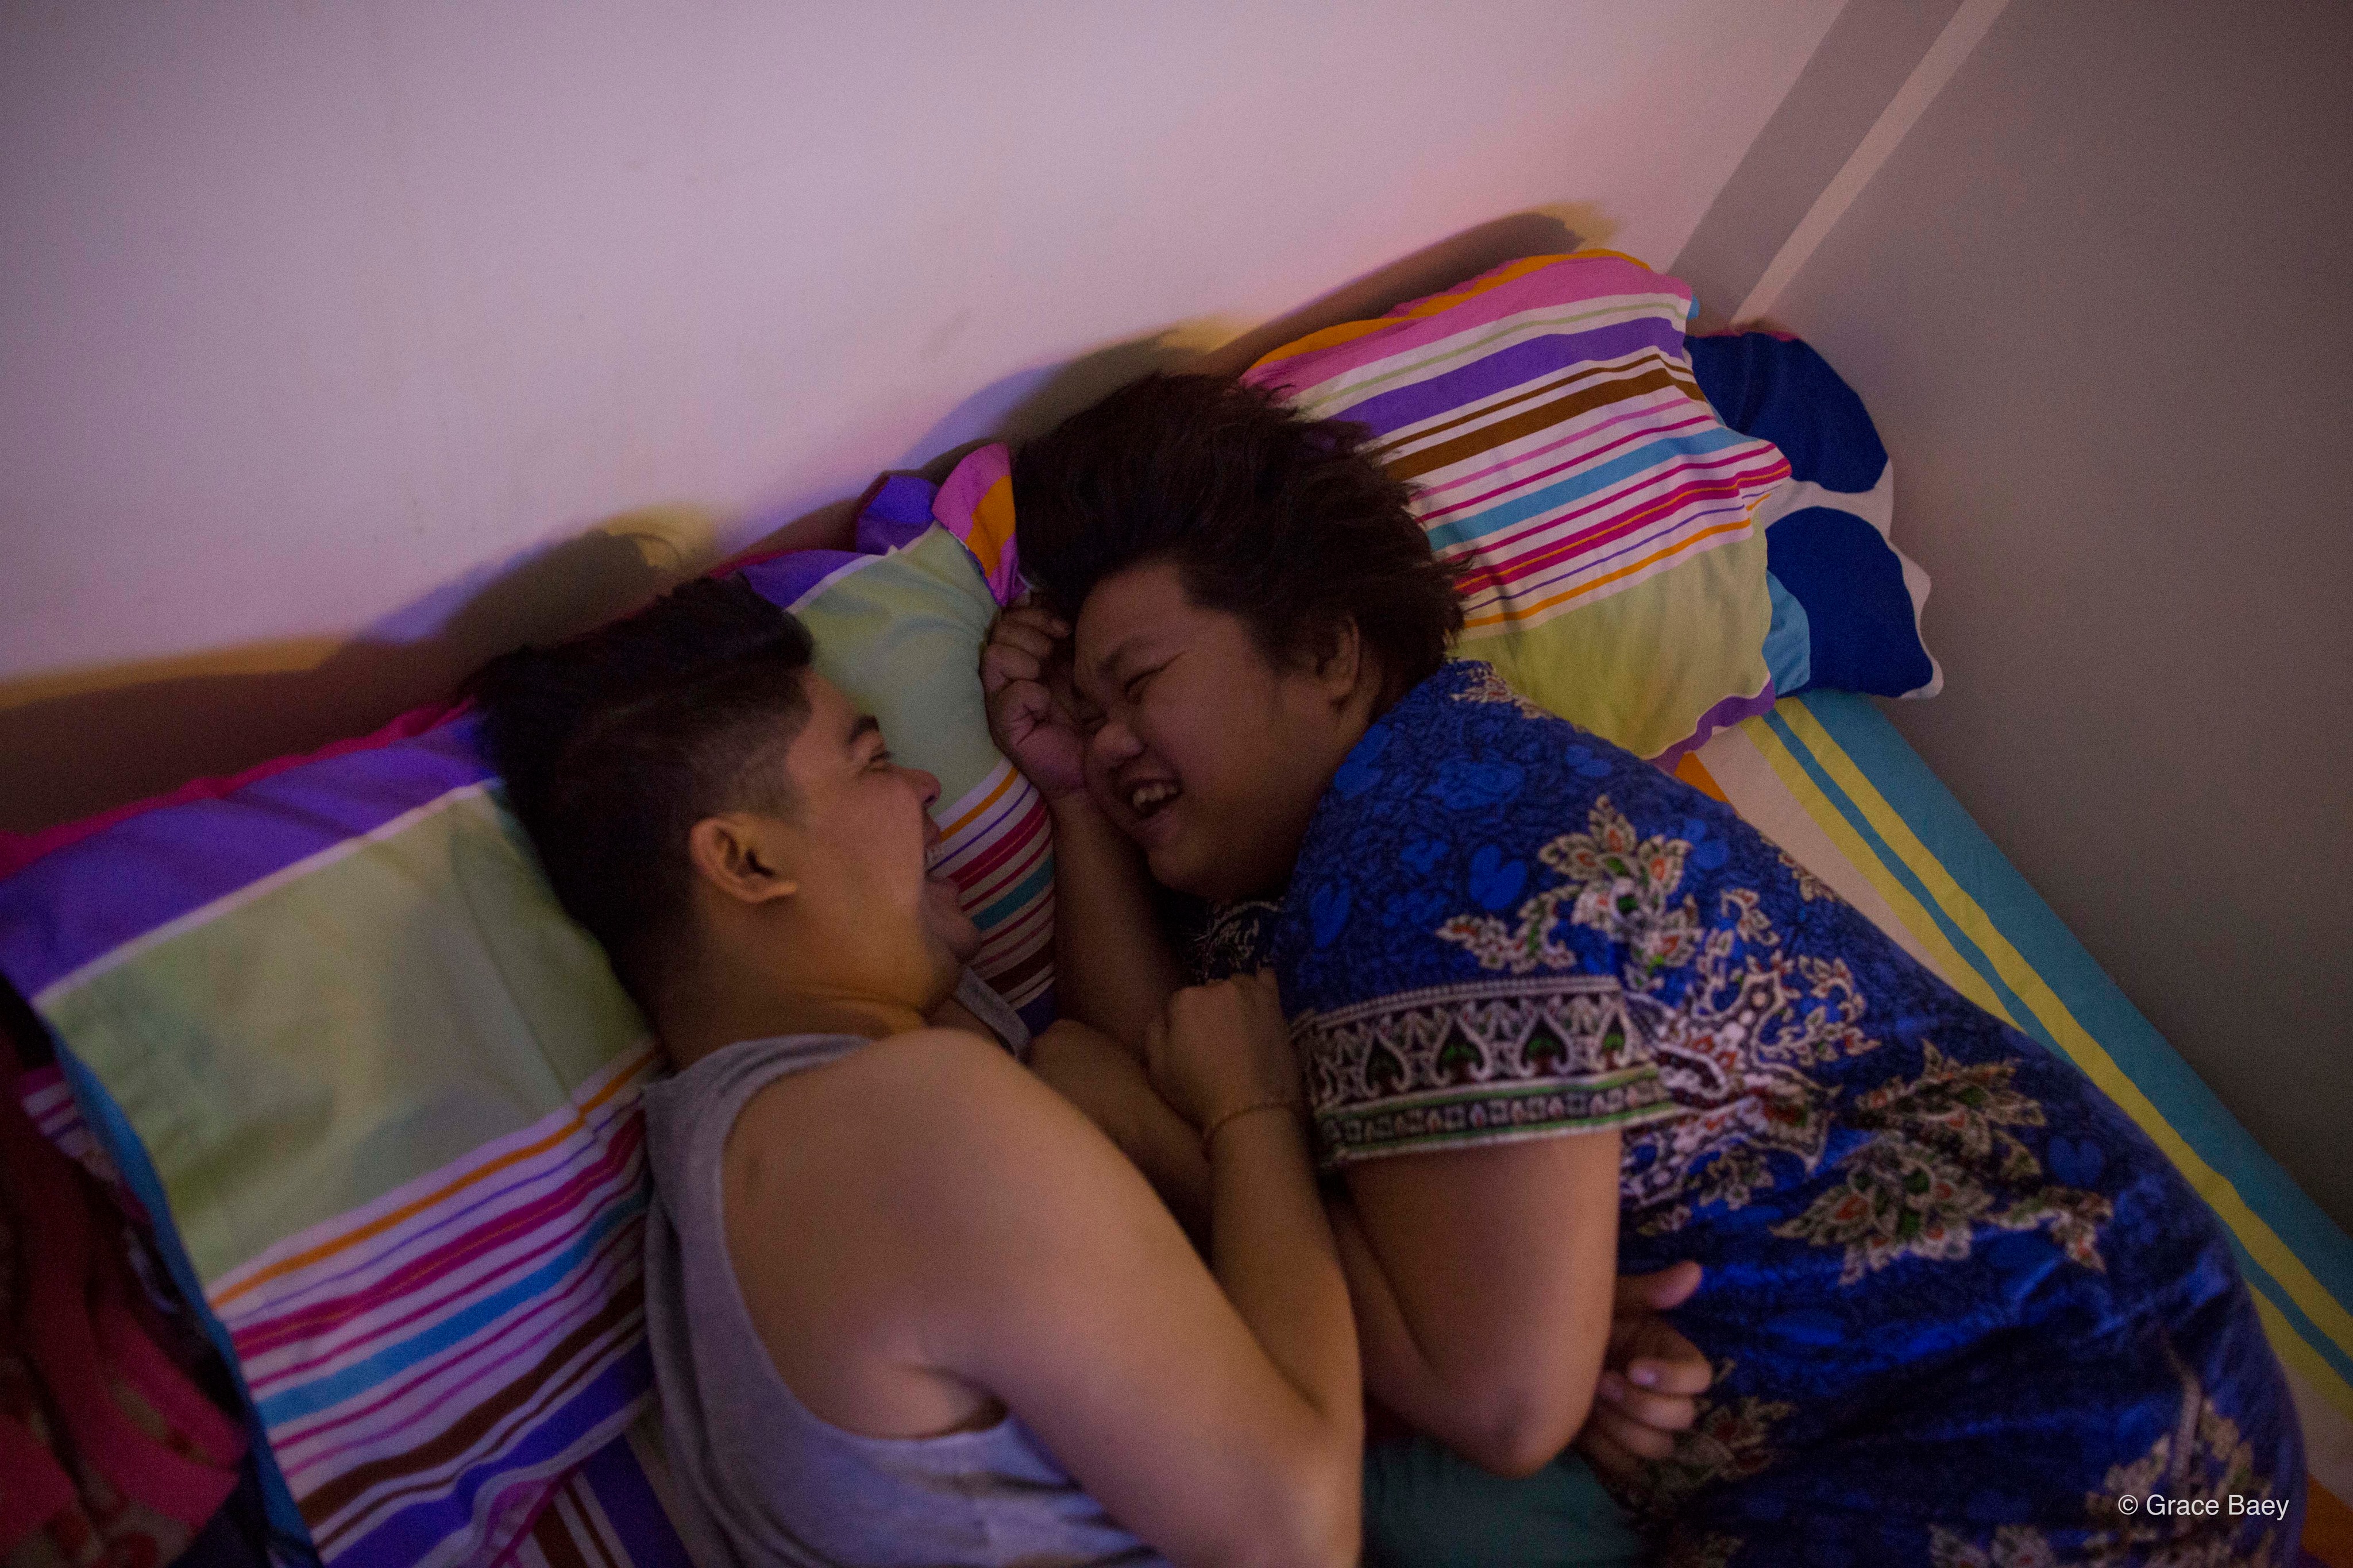 Yaya enjoys a light-hearted moment with her partner, Kaw San, in their shared apartment. Yaya and Kaw San have been living together for the past six years. Kaw San also cared for Yaya’s mother when she was ill and eventually passed on. Photo: Grace Baey